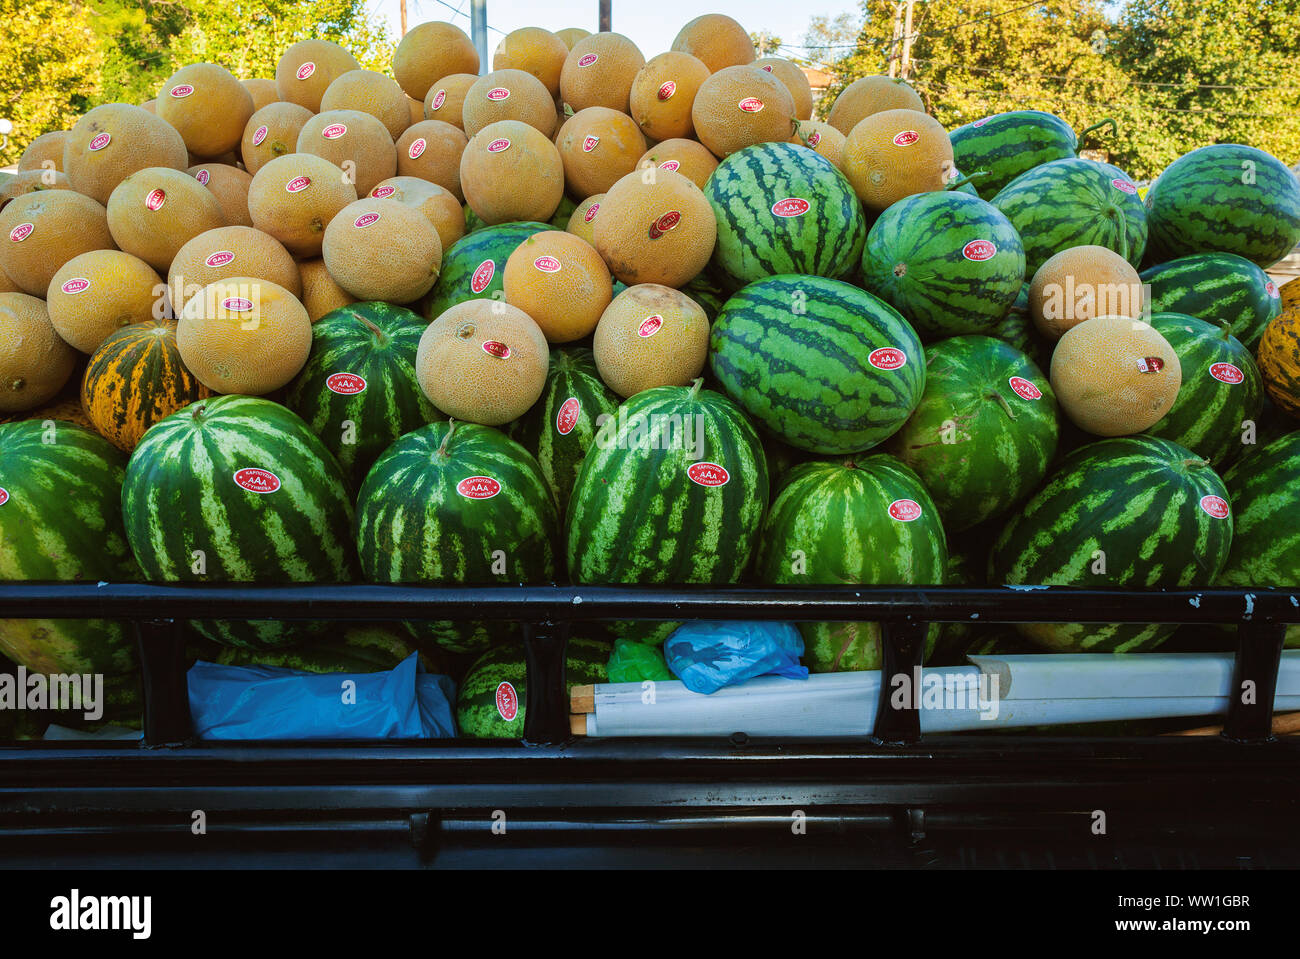 Stavros, Greece - August 29, 2019: Closeup view on water melons and yellow melons. On sale across the town during summer season. Stock Photo